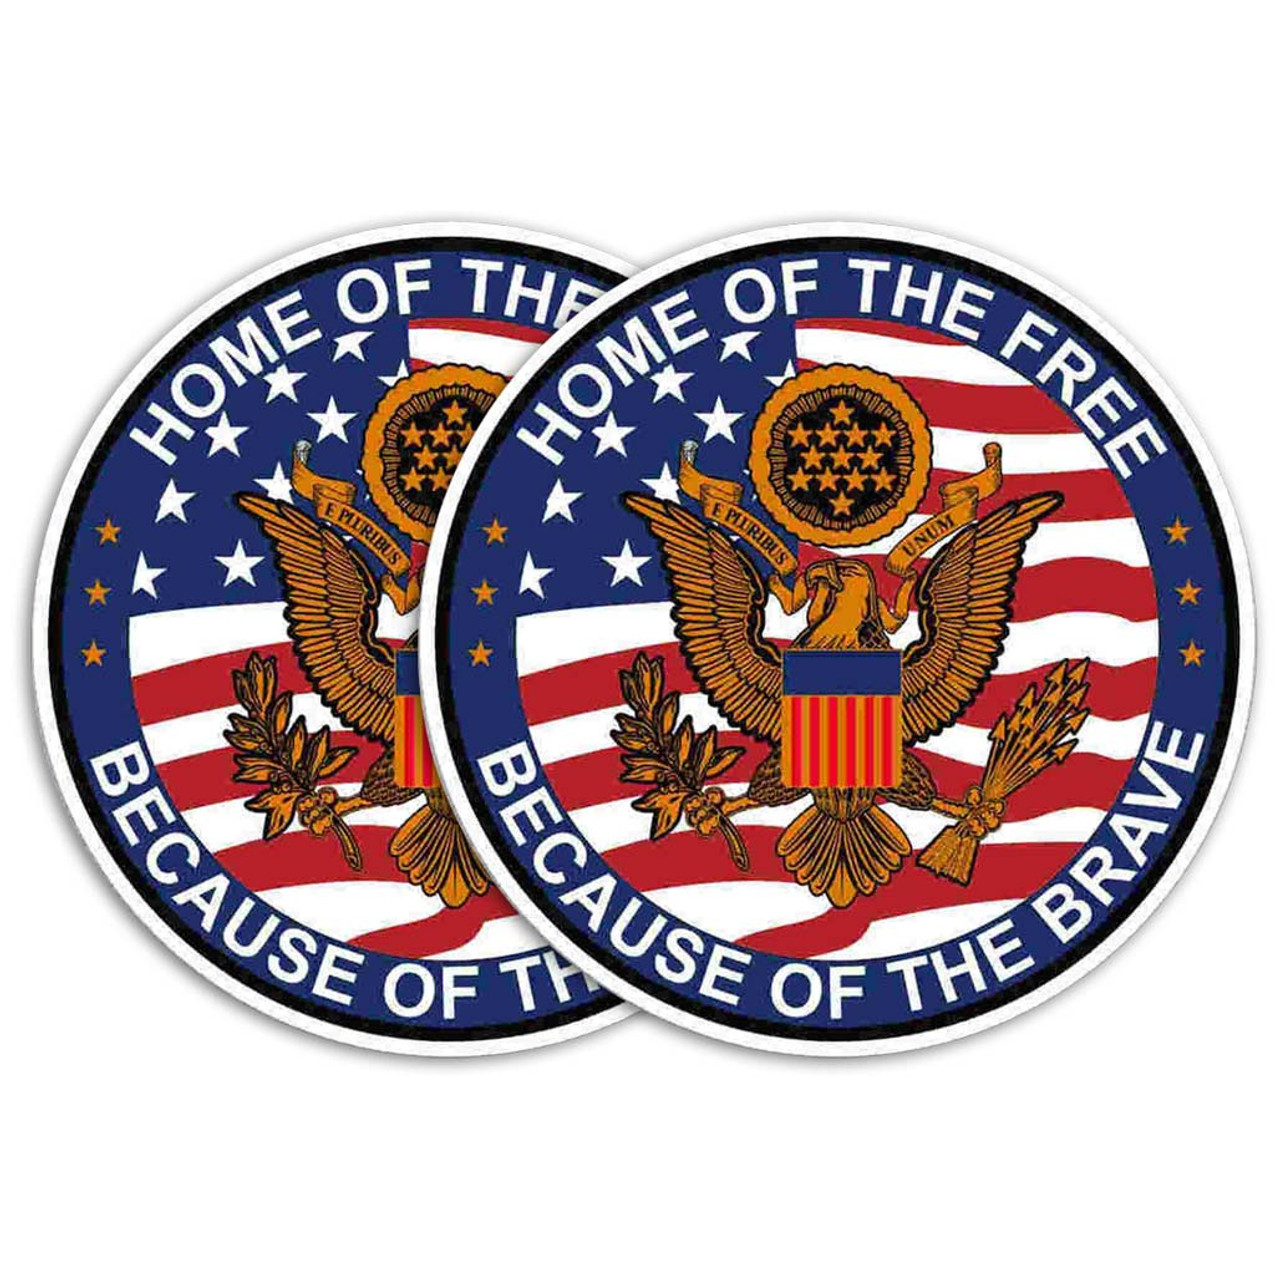 Home of the Free - Because of the Brave Circle Decal Quantity of (2) - shown in a photo as a pack of two.